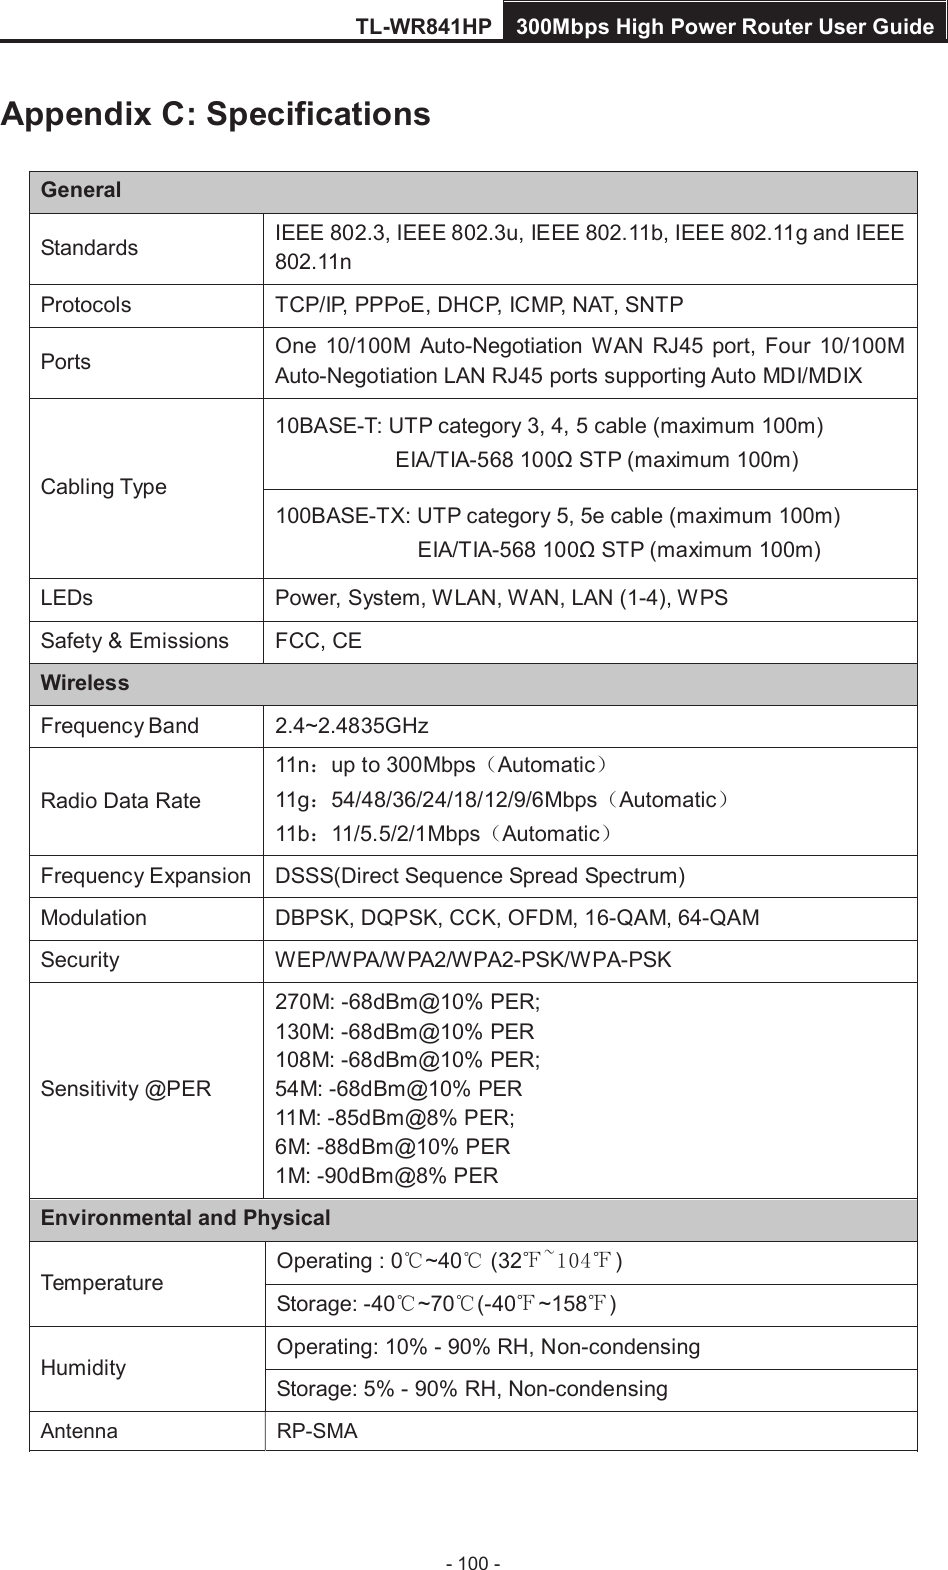 TL-WR841HP 300Mbps High Power Router User Guide  - 100 - Appendix C: Specifications General Standards  IEEE 802.3, IEEE 802.3u, IEEE 802.11b, IEEE 802.11g and IEEE 802.11n Protocols  TCP/IP, PPPoE, DHCP, ICMP, NAT, SNTP Ports  One 10/100M  Auto-Negotiation  WAN  RJ45 port,  Four  10/100M Auto-Negotiation LAN RJ45 ports supporting Auto MDI/MDIX Cabling Type 10BASE-T: UTP category 3, 4, 5 cable (maximum 100m) EIA/TIA-568 100Ω STP (maximum 100m) 100BASE-TX: UTP category 5, 5e cable (maximum 100m) EIA/TIA-568 100Ω STP (maximum 100m) LEDs  Power, System, WLAN, WAN, LAN (1-4), WPS Safety &amp; Emissions  FCC, CE Wireless Frequency Band 2.4~2.4835GHz Radio Data Rate 11n：up to 300Mbps（Automatic） 11g：54/48/36/24/18/12/9/6Mbps（Automatic） 11b：11/5.5/2/1Mbps（Automatic） Frequency Expansion  DSSS(Direct Sequence Spread Spectrum) Modulation  DBPSK, DQPSK, CCK, OFDM, 16-QAM, 64-QAM Security  WEP/WPA/WPA2/WPA2-PSK/WPA-PSK Sensitivity @PER 270M: -68dBm@10% PER; 130M: -68dBm@10% PER 108M: -68dBm@10% PER;   54M: -68dBm@10% PER 11M: -85dBm@8% PER;   6M: -88dBm@10% PER 1M: -90dBm@8% PER Environmental and Physical Temperature Operating : 0℃~40℃ (32℉~104℉) Storage: -40℃~70℃(-40℉~158℉) Humidity Operating: 10% - 90% RH, Non-condensing Storage: 5% - 90% RH, Non-condensing Antenna RP-SMA